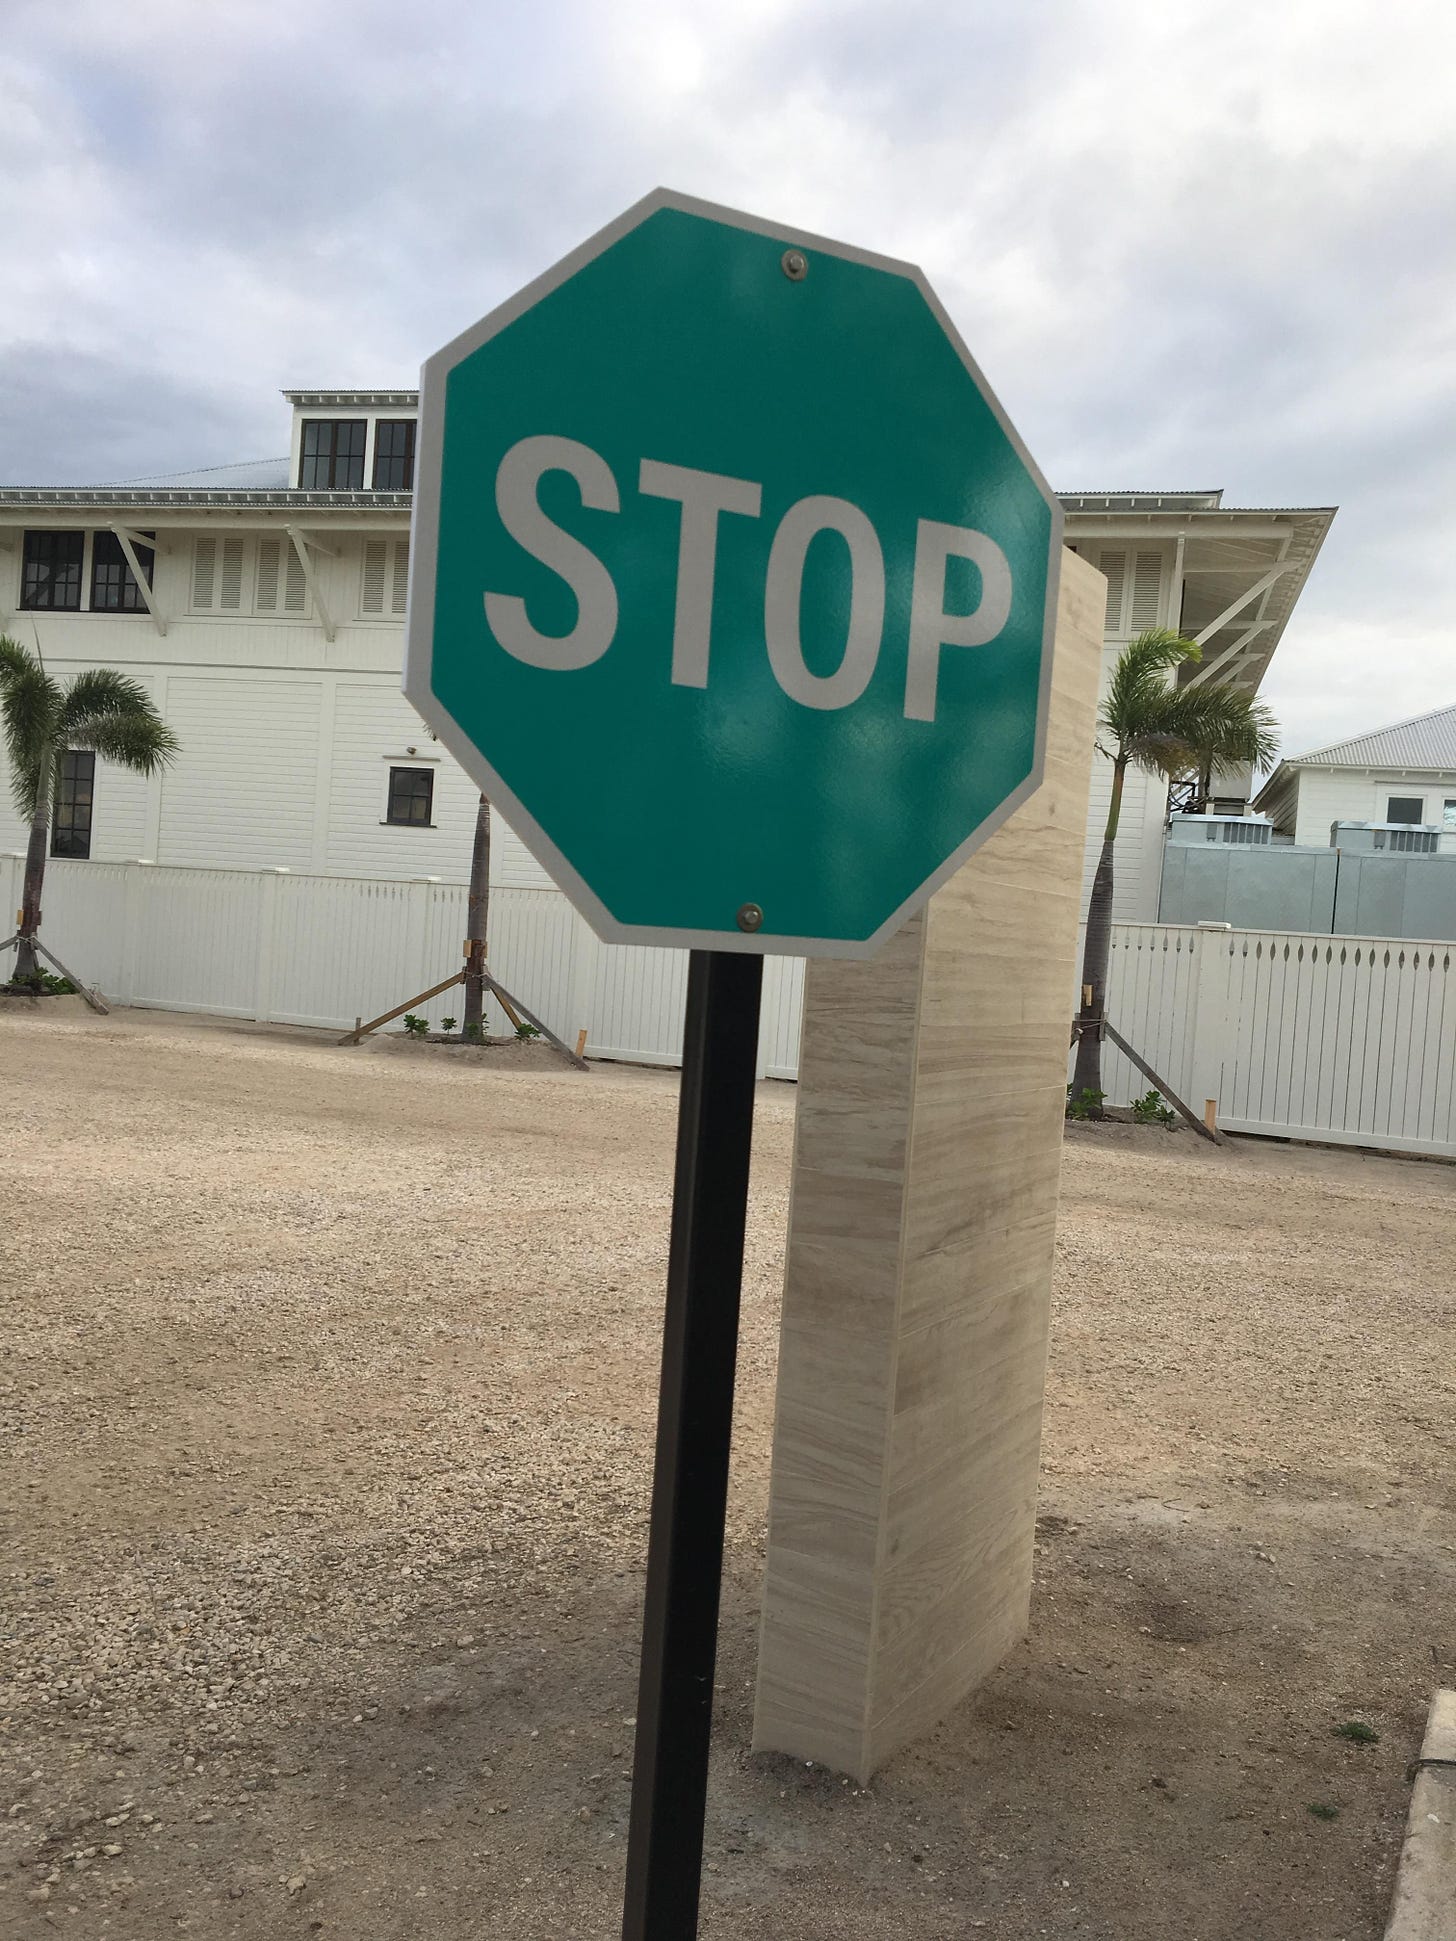 a green stop sign | Green stop sign, Stop sign, Reaction pictures